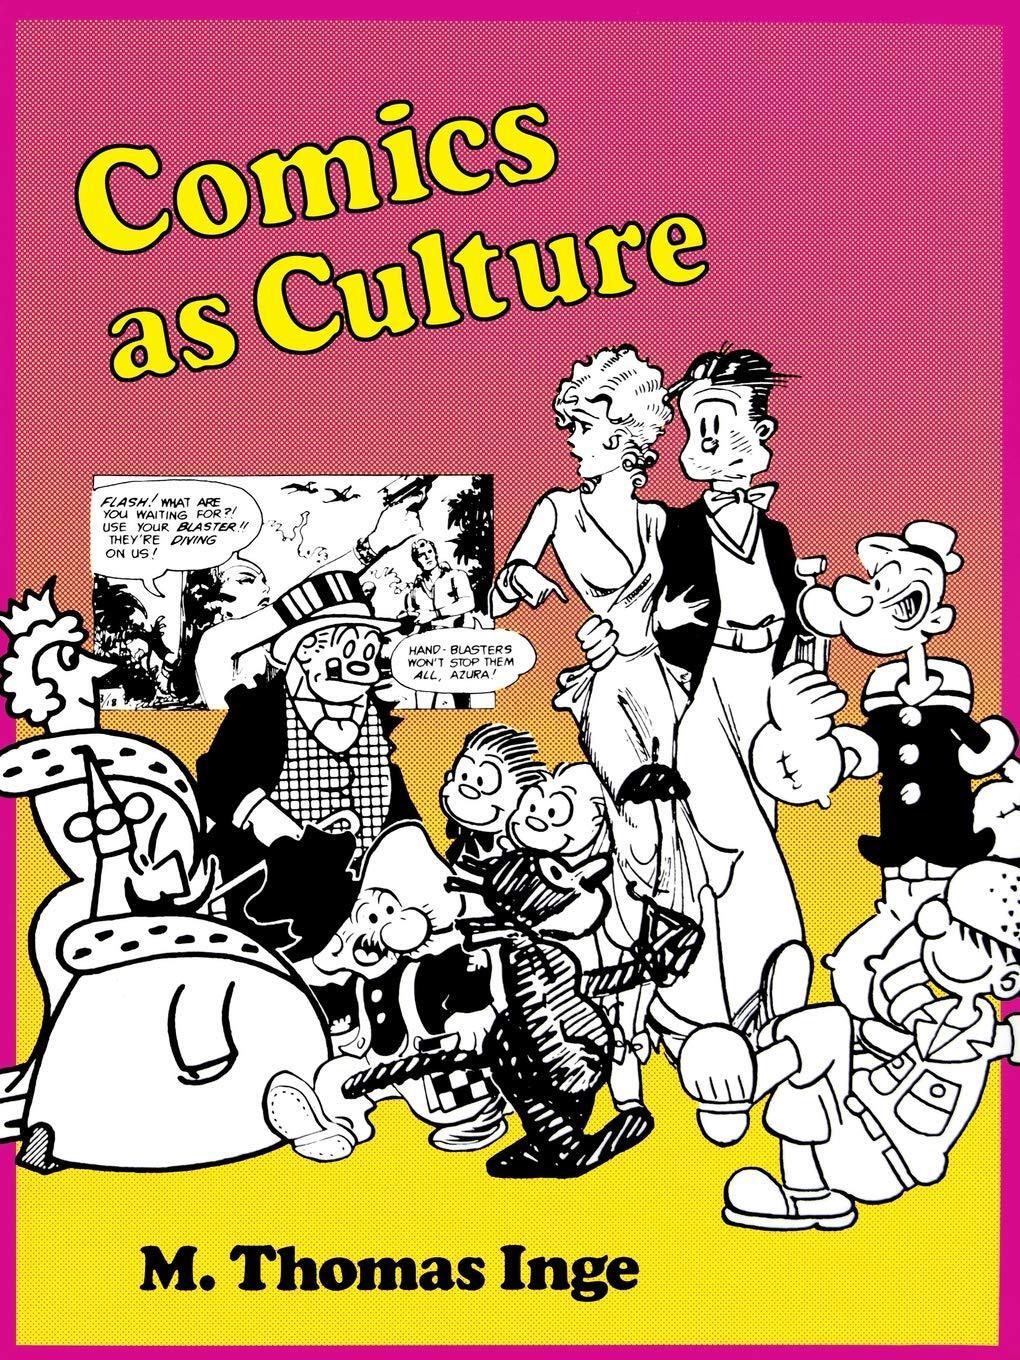 The book cover of "Comics as Culture" with the author listed as M. Thomas Inge.